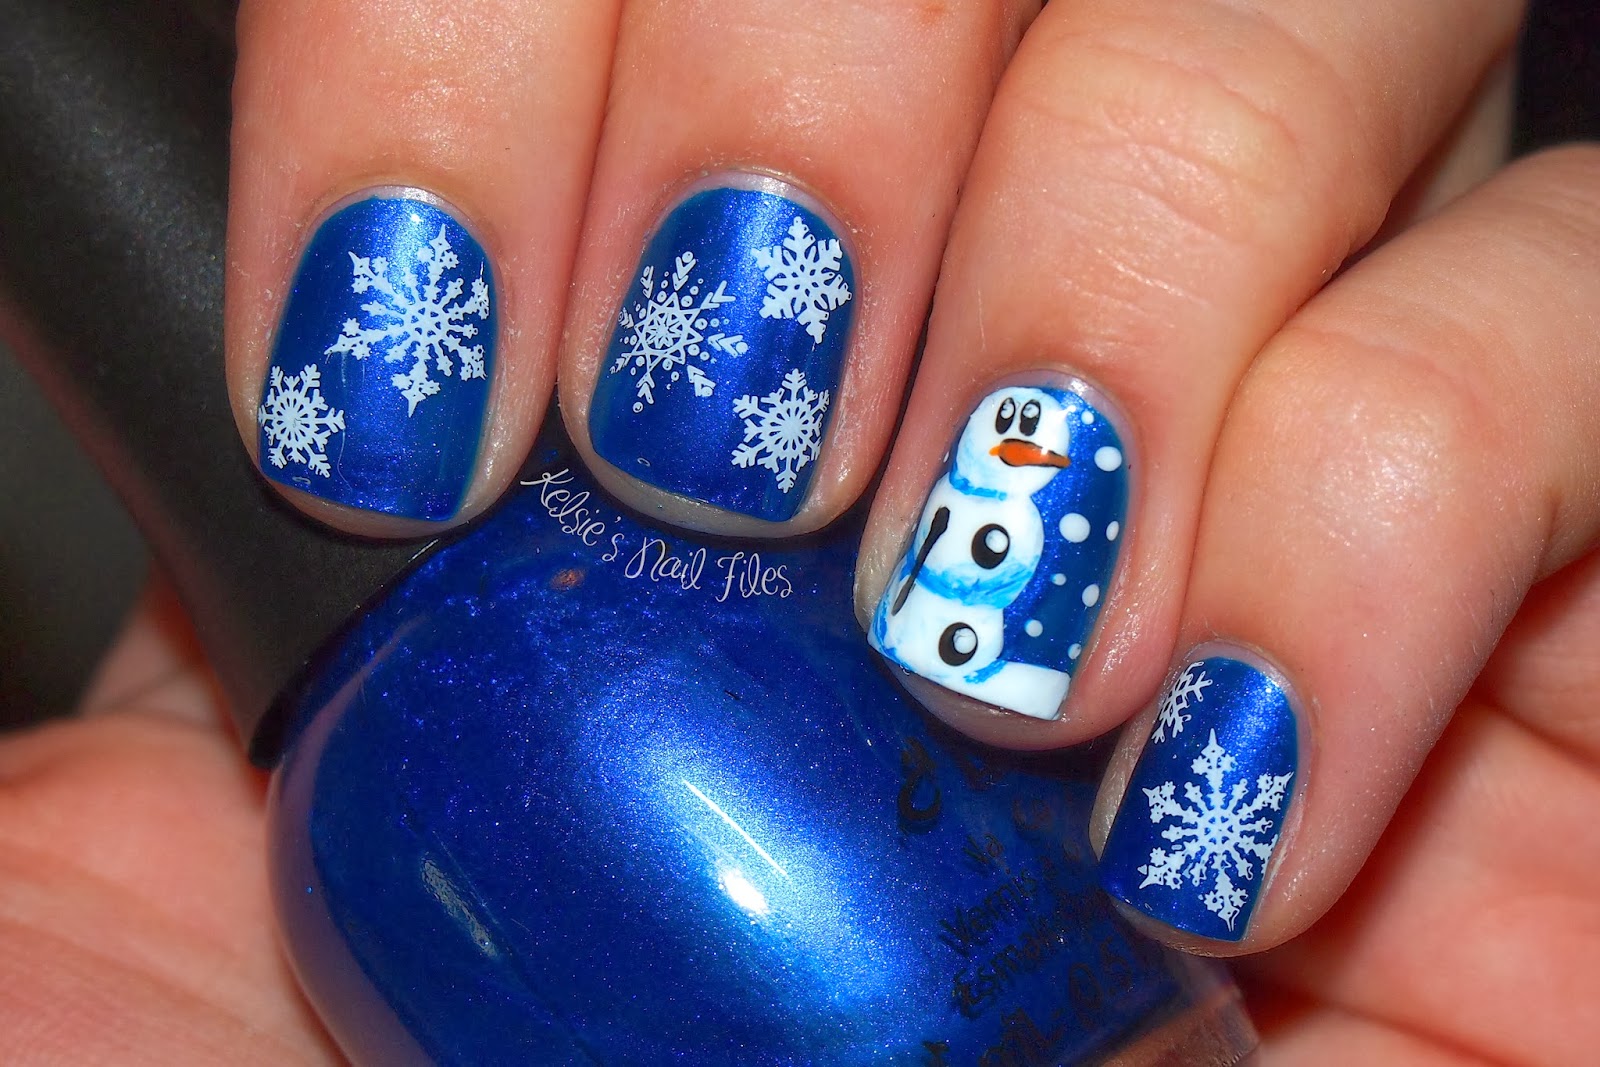 acrylic nail design for winter